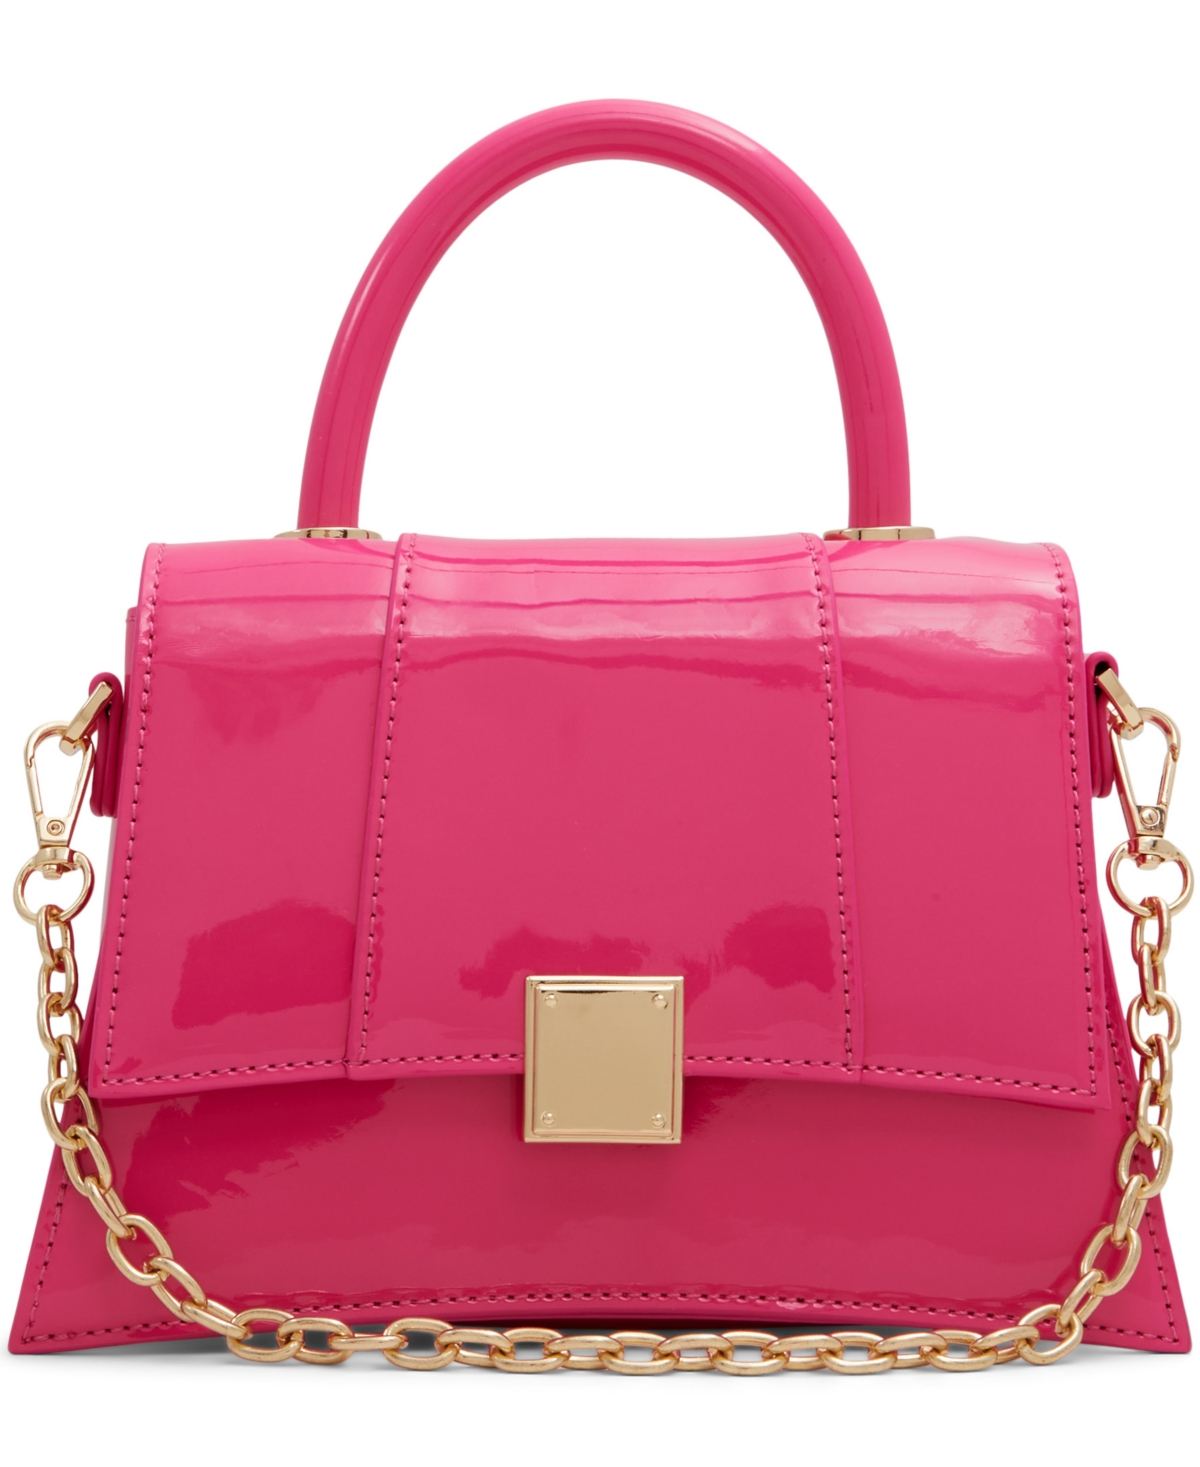 Aldo Kindraax Synthetic Small Top Handle Bag In Bright Pink